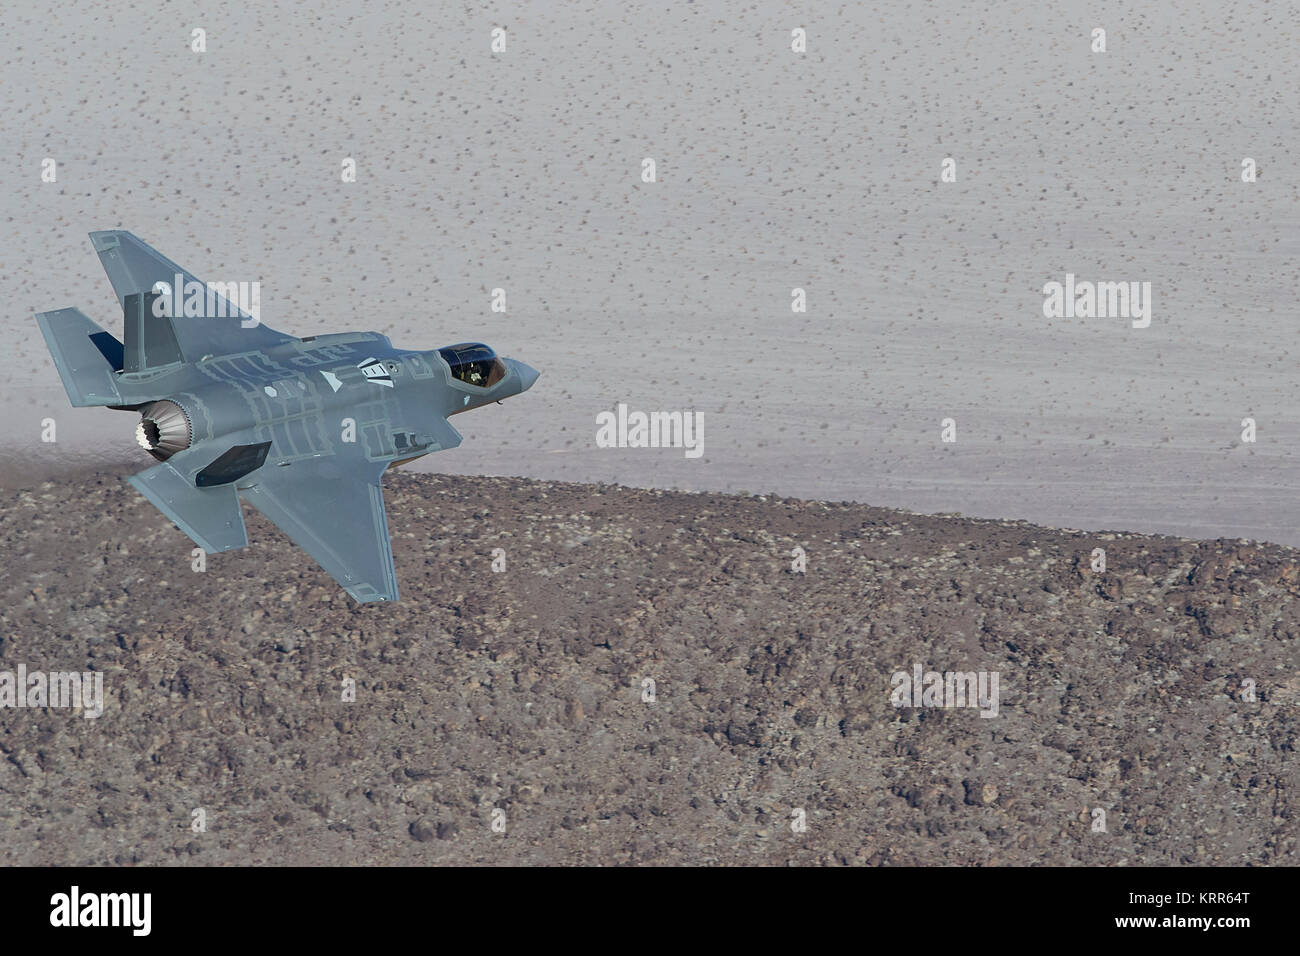 Lockheed Martin F-35A Lightning II Joint Strike Fighter (Stealth Fighter), Flying At Low Level Over The Mojave Desert, California, USA. Stock Photo